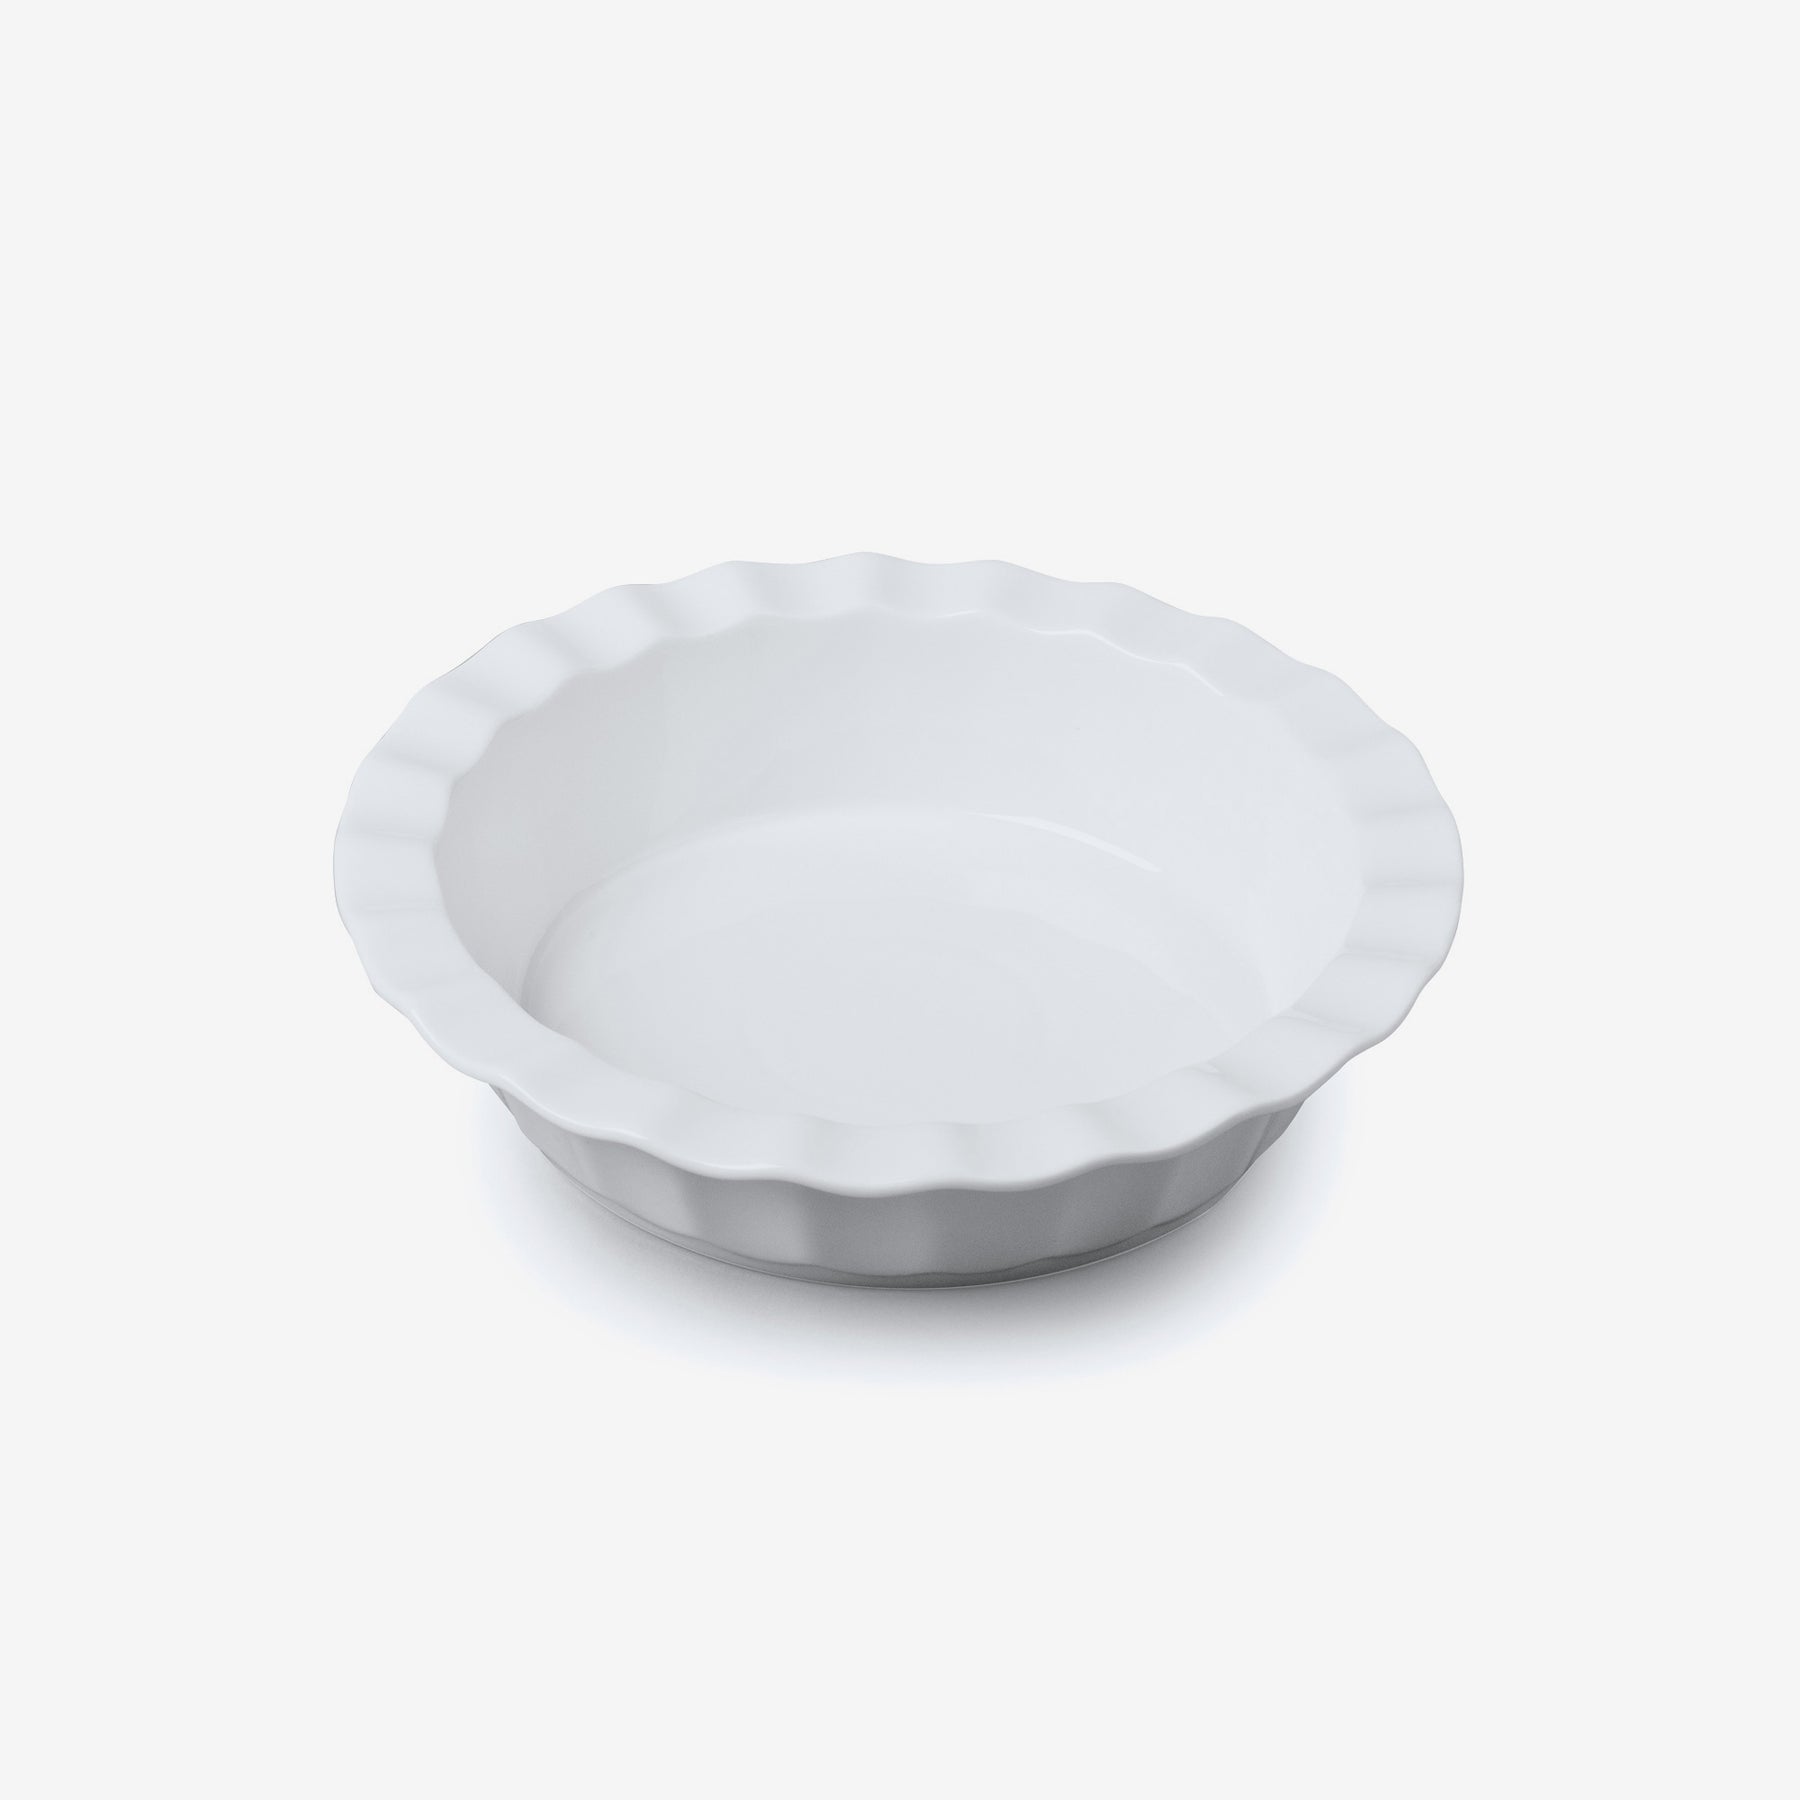 Porcelain Deep Round Crinkle Rim Pie Dish, Available in 2 Sizes